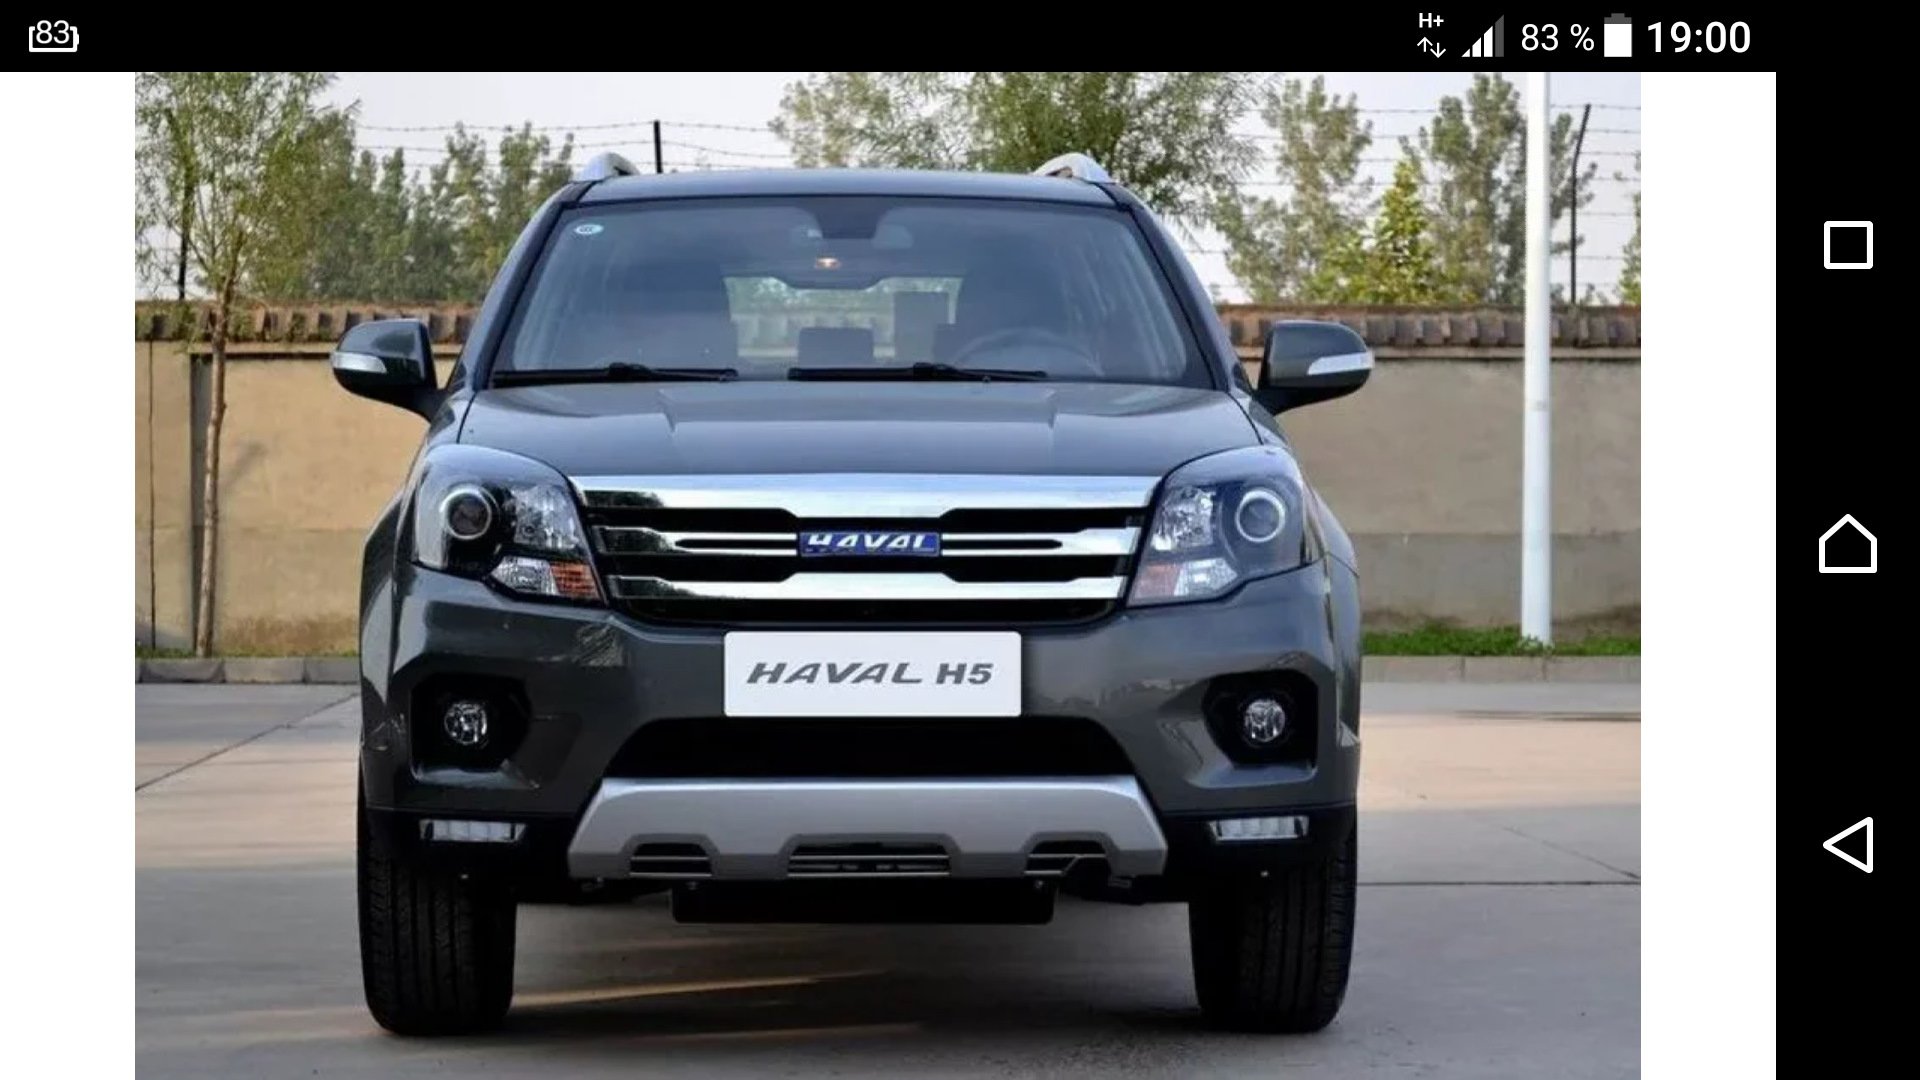 Ховер н5 2014. Haval Hover h5. Great Wall Haval h5. Great Wall Hover h5, Haval h5. Haval h5 2020.